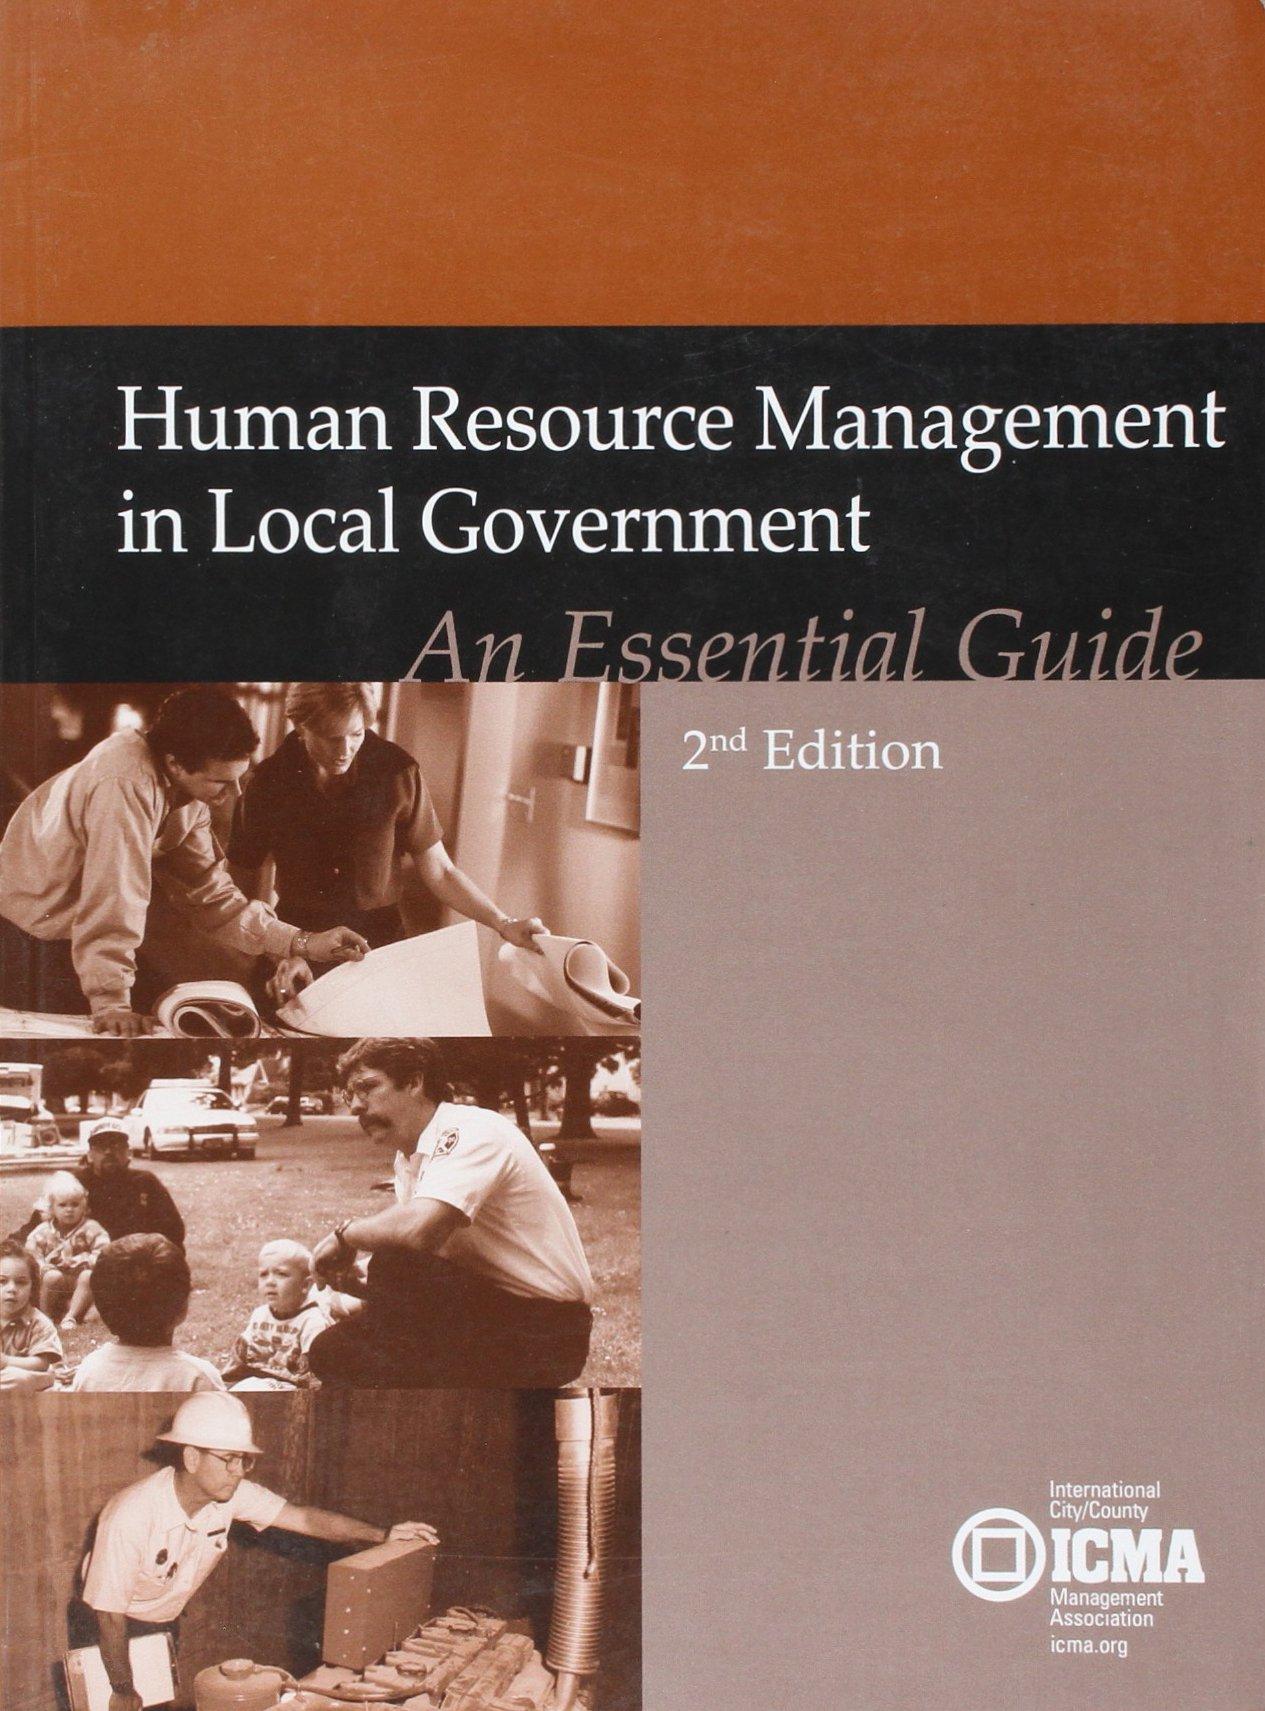 human resource management in local government an essential guide 2nd edition siegrun fox freyss 0873261445,